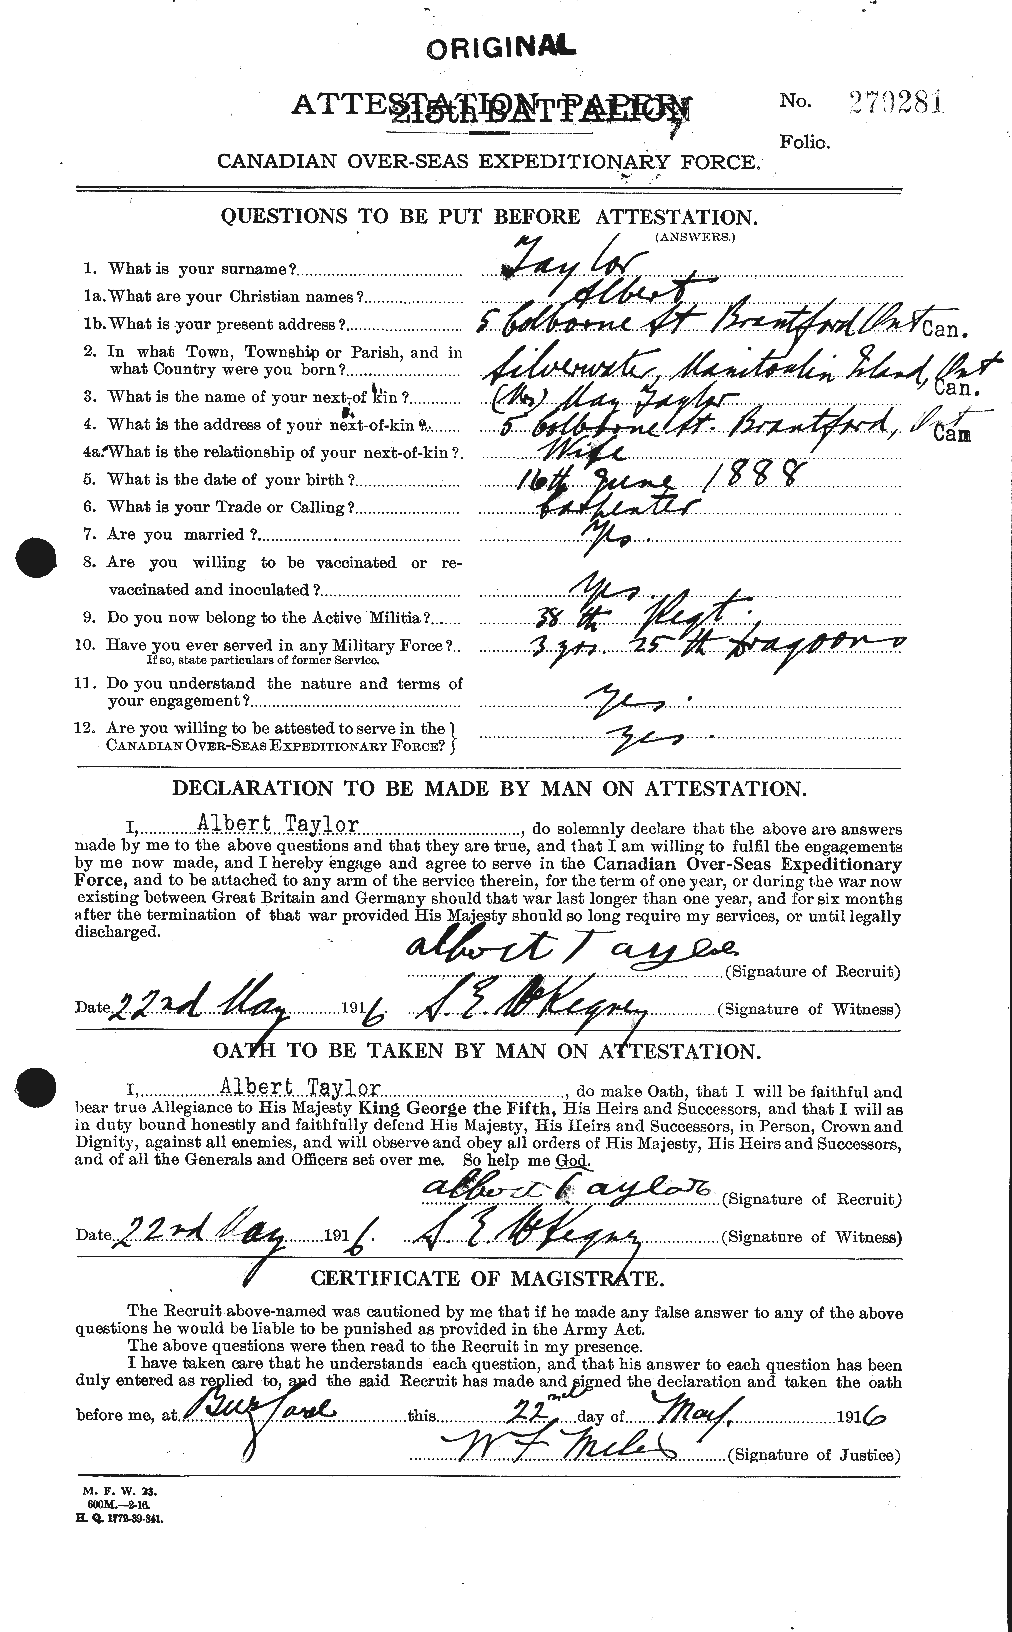 Personnel Records of the First World War - CEF 626082a